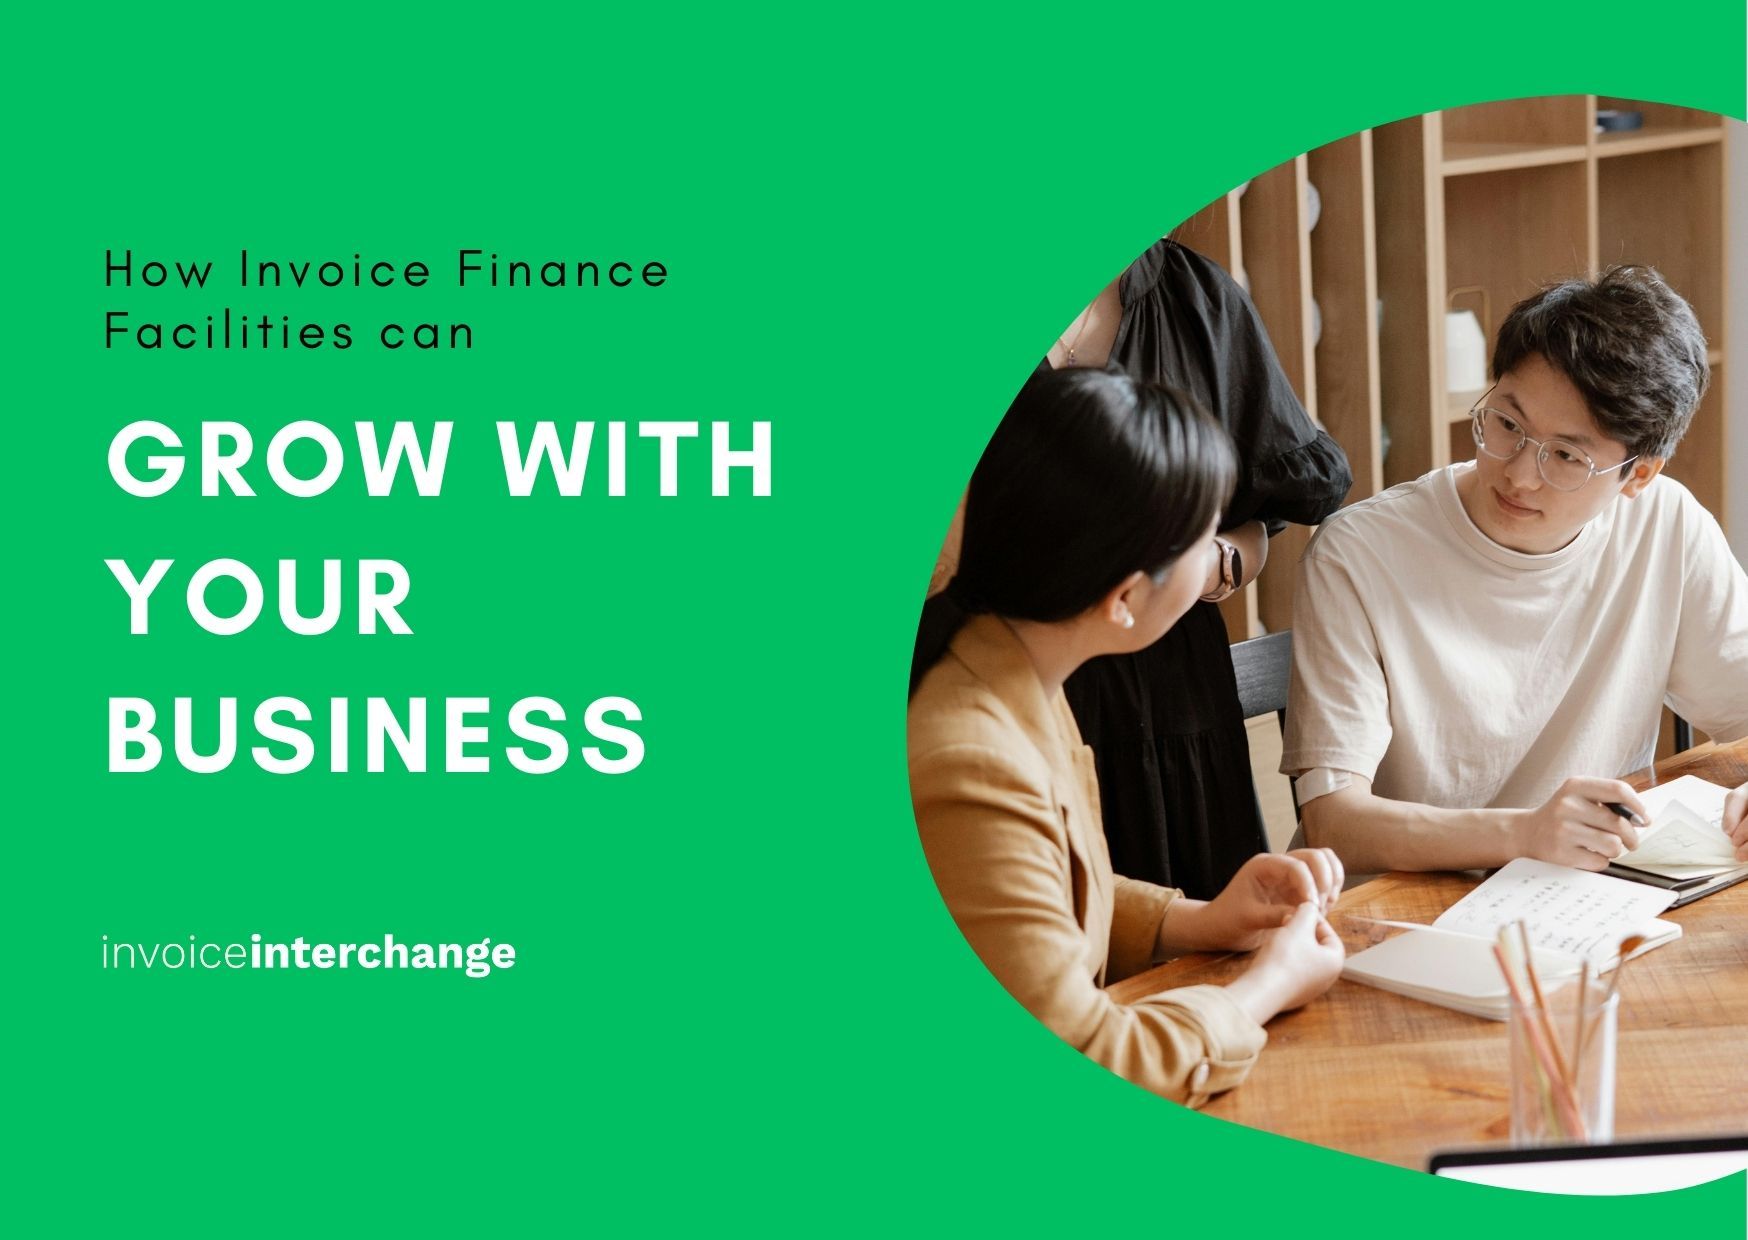 How Invoice Finance Facilities Can Grow With Your Business